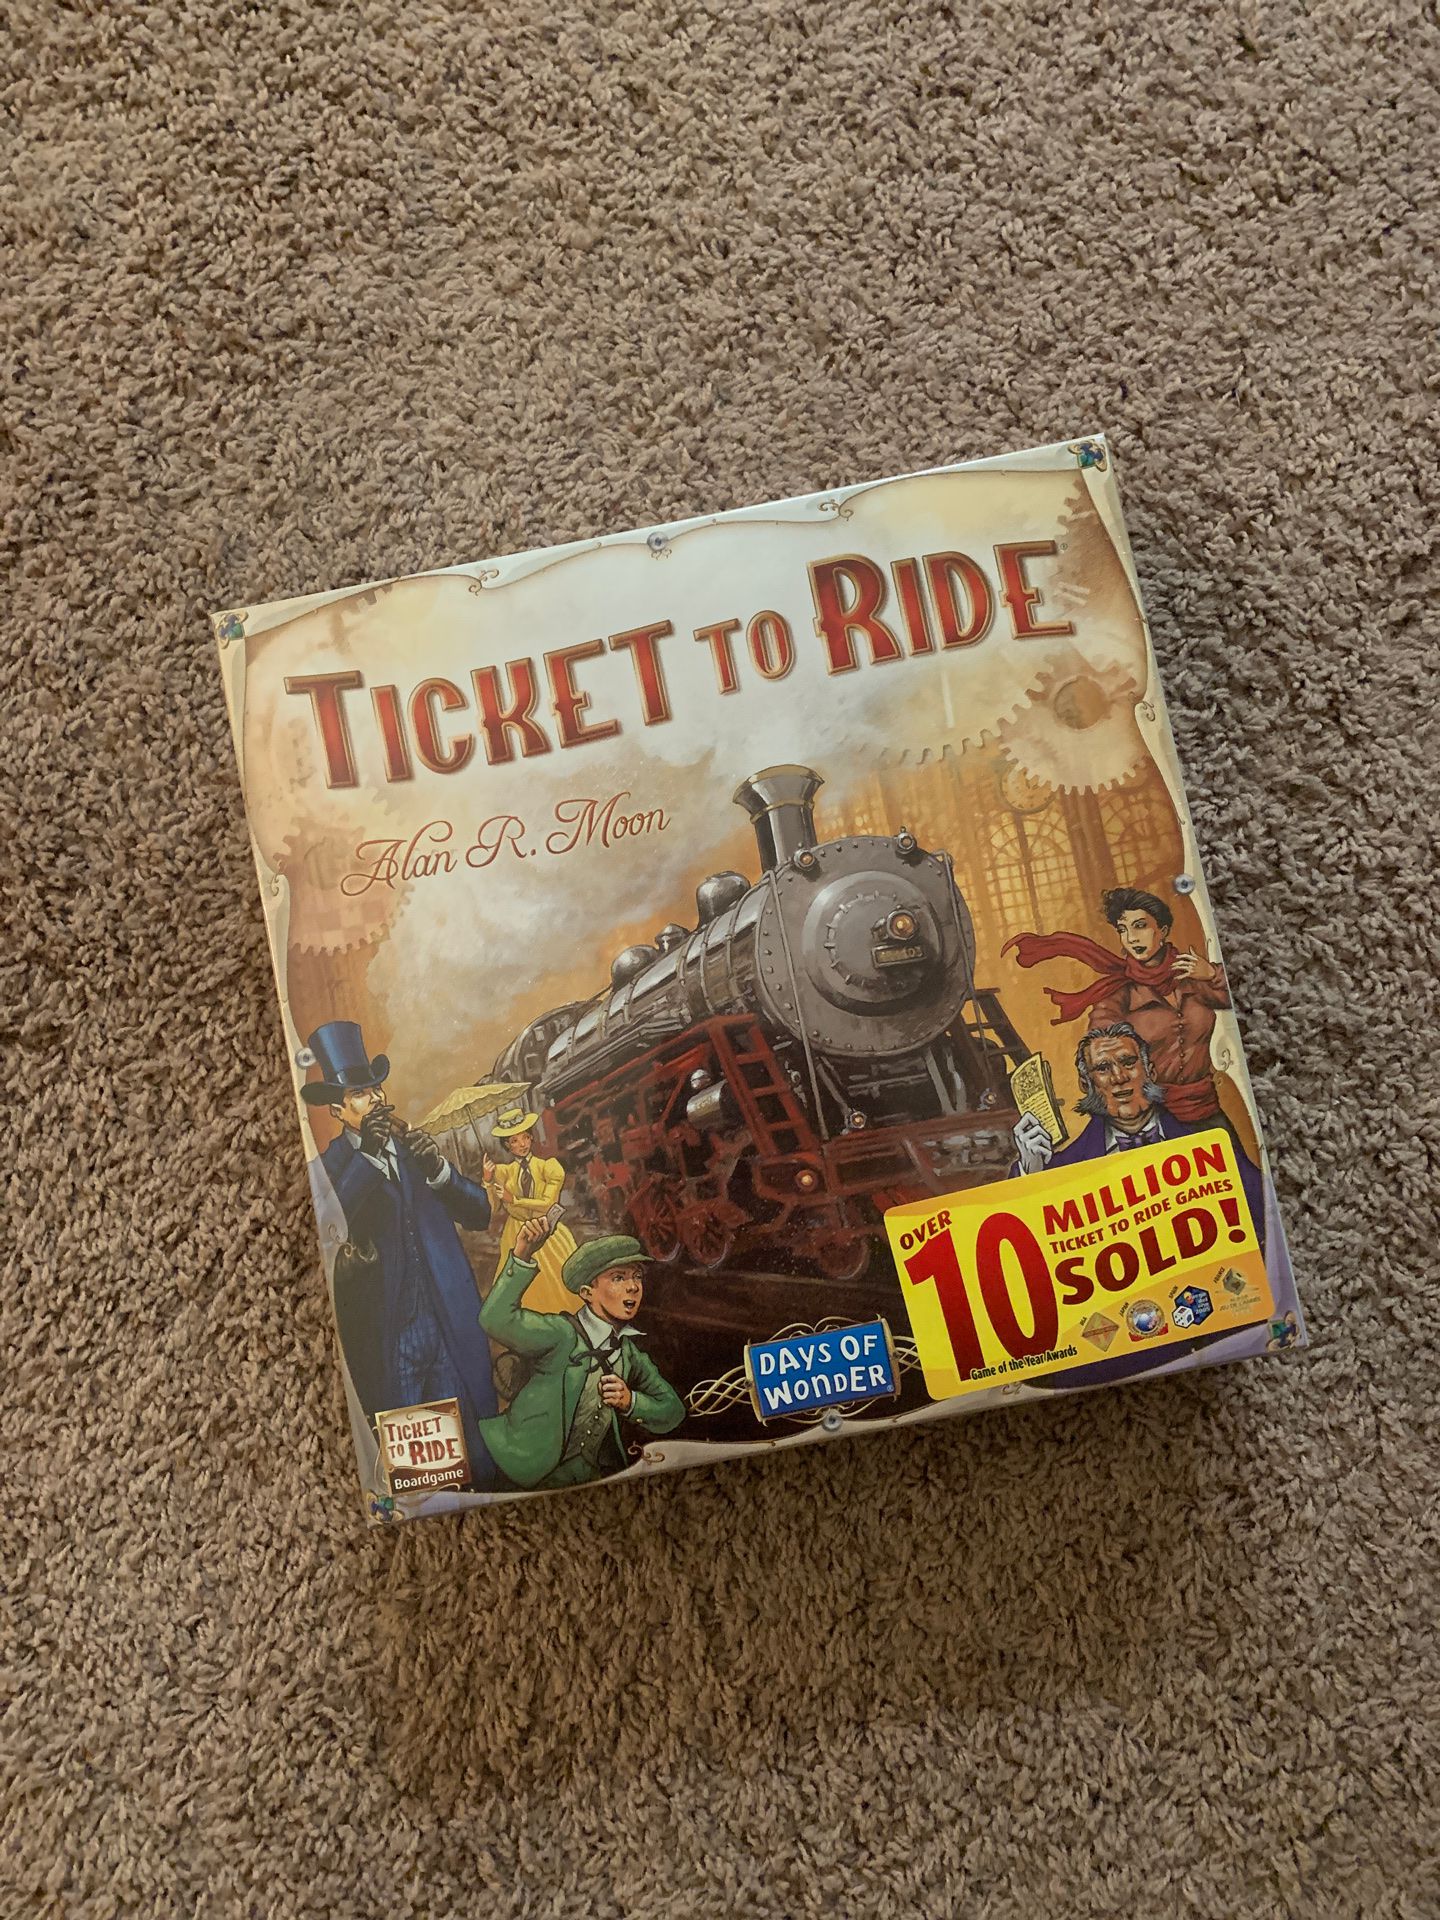 Brand new Ticket to Ride Boardgame